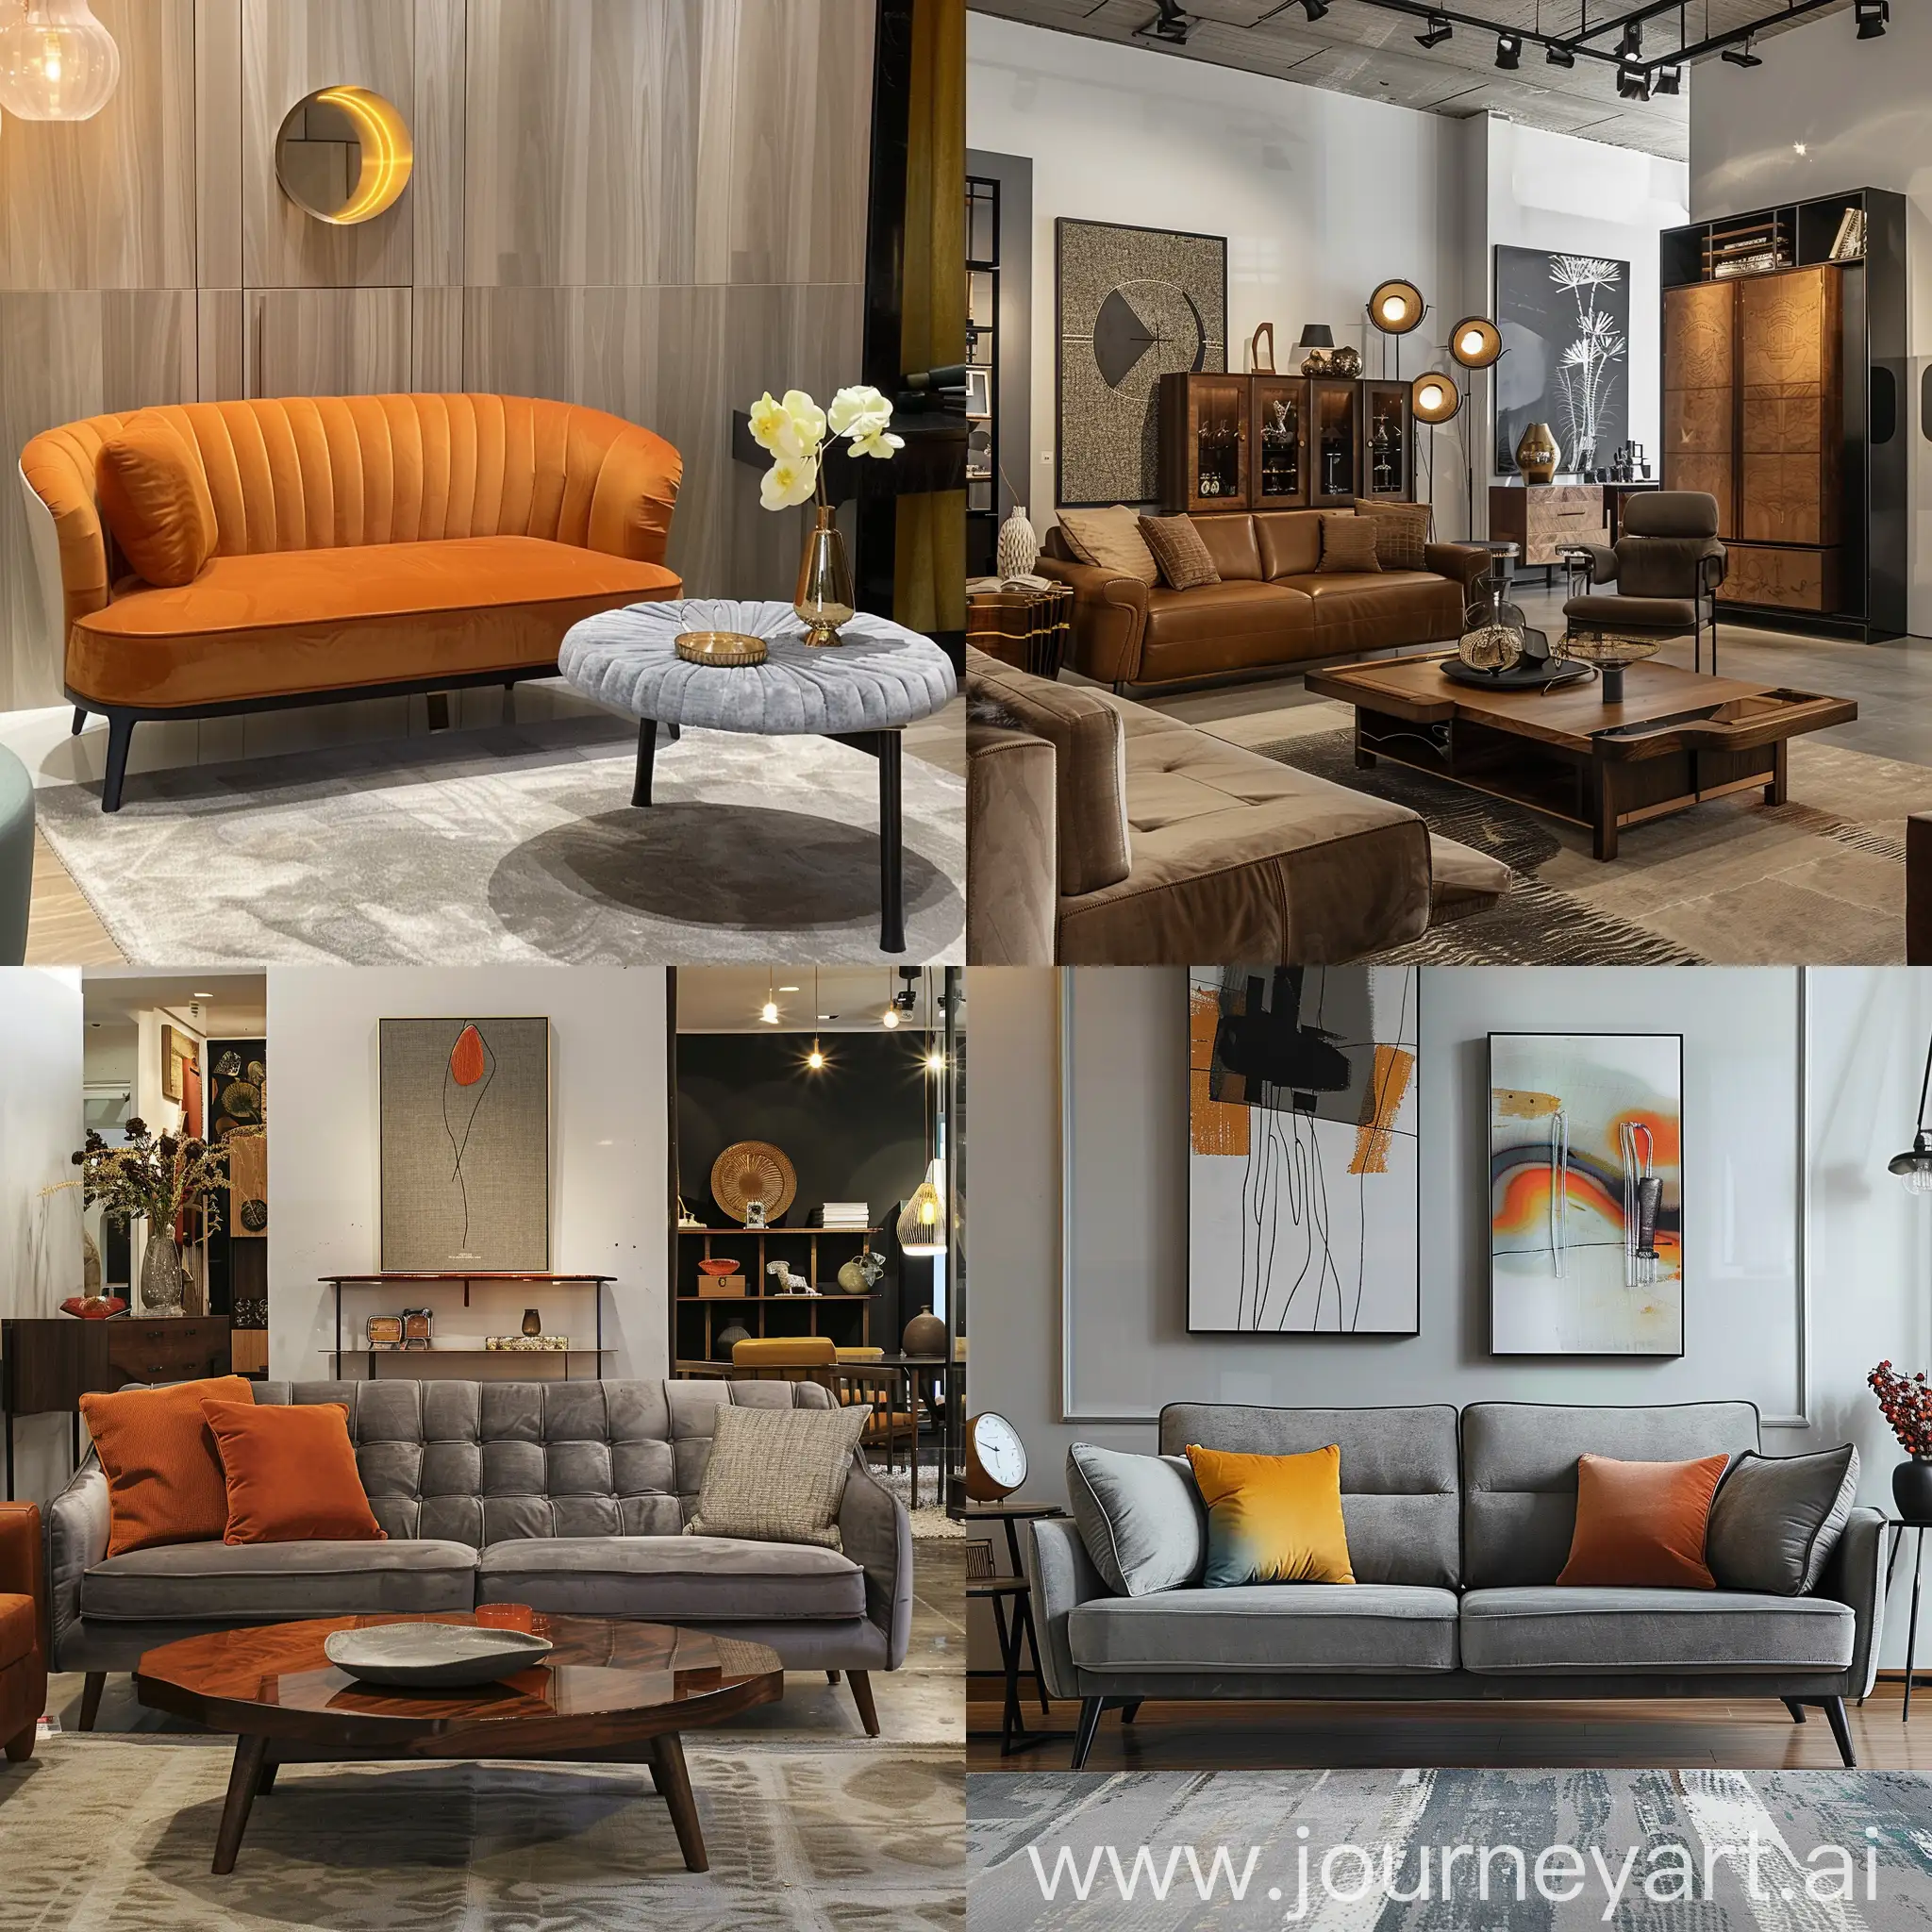 Modern-Furniture-Store-Display-with-Variety-of-Designs